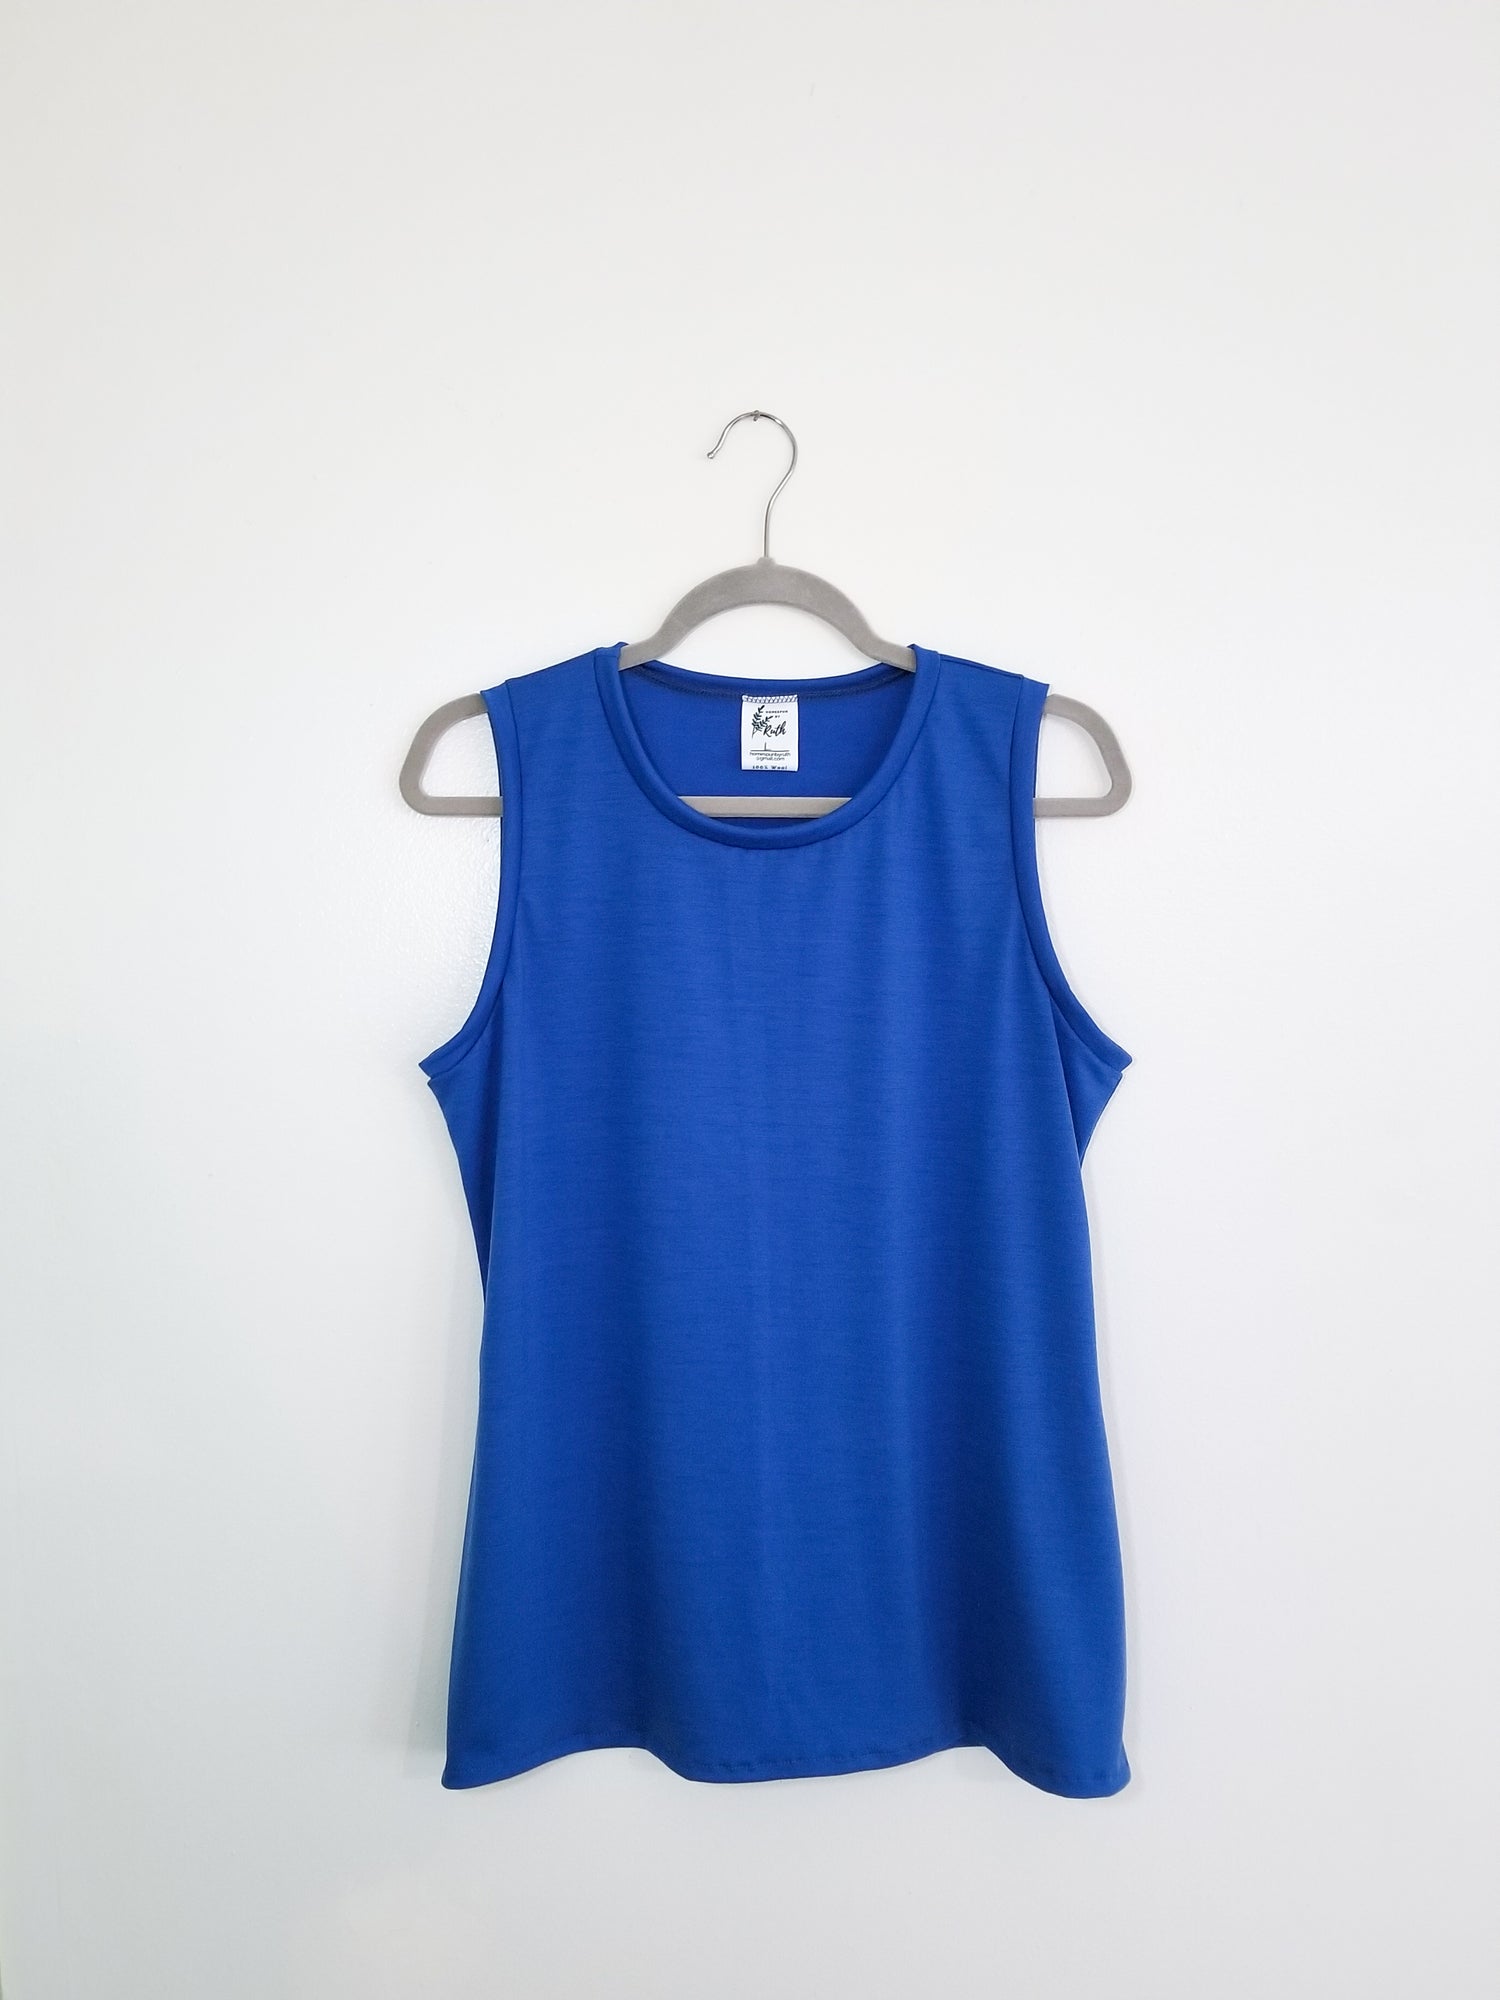 A Blue, 100% Merino wool women's tank top hanging on a grey hanger against a white wall